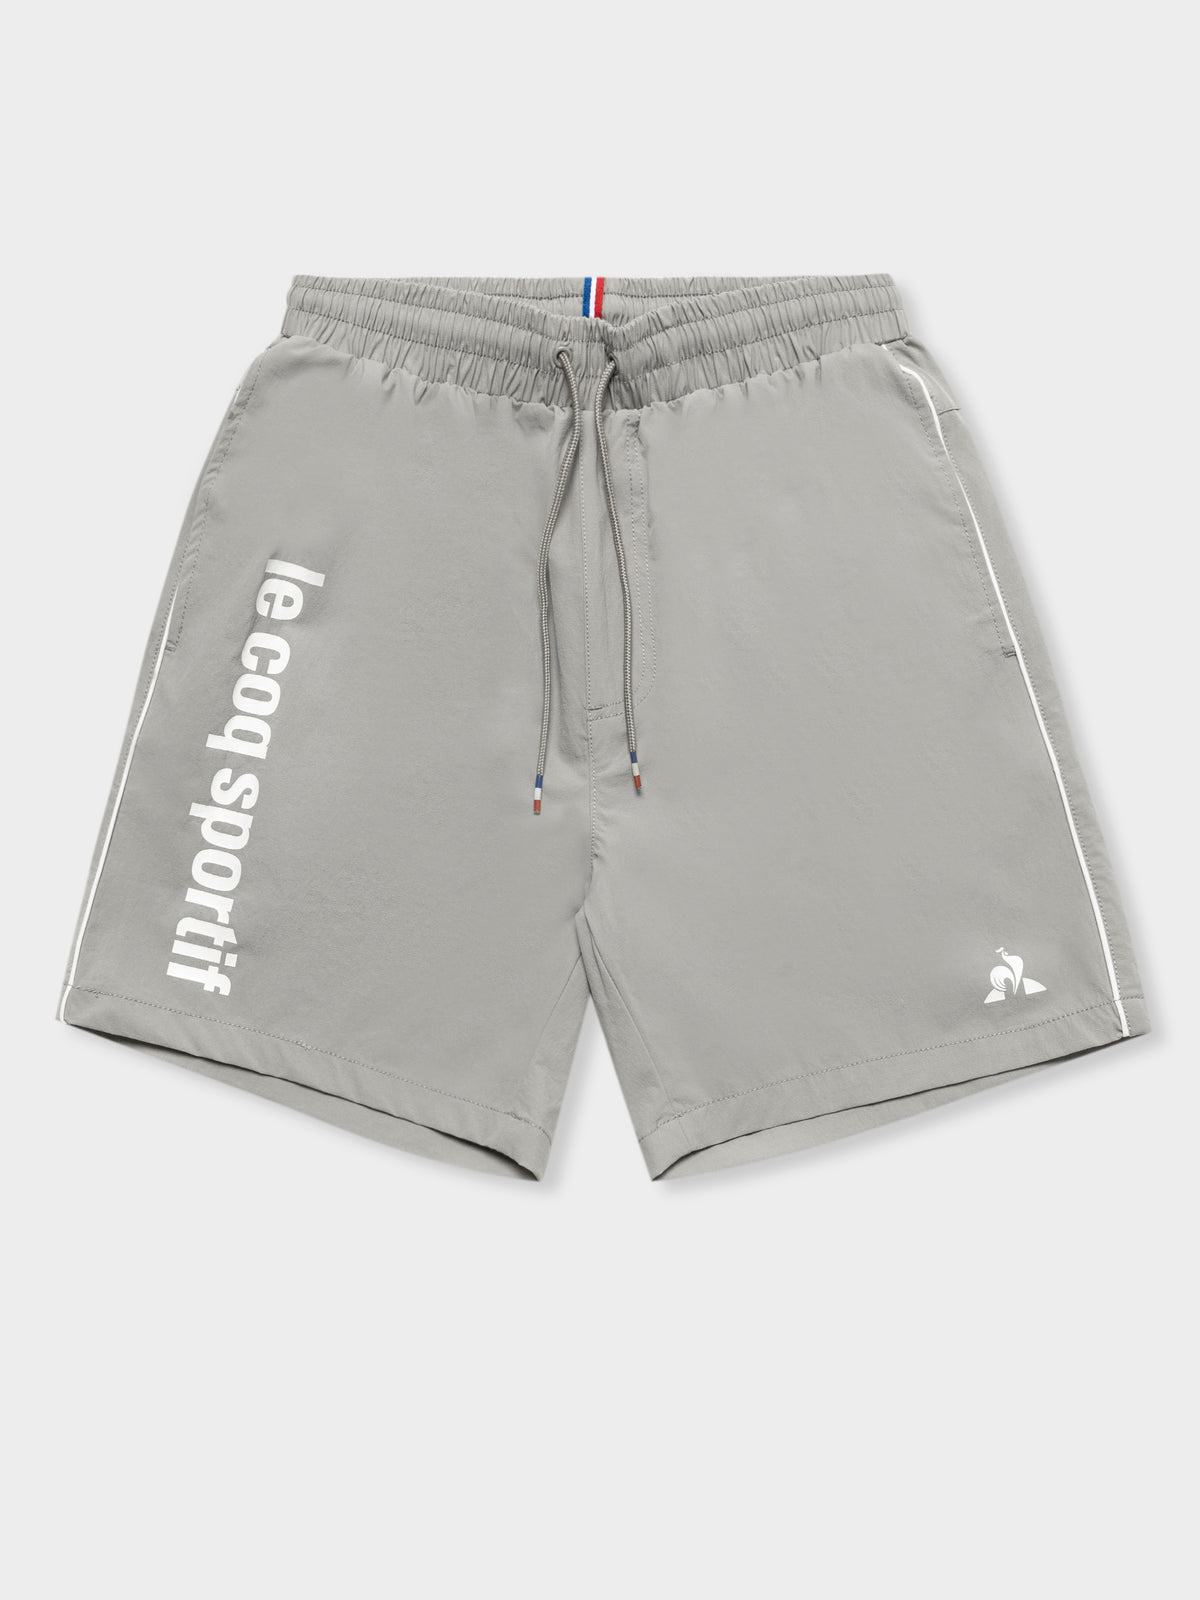 Concurrent Shorts in Grey